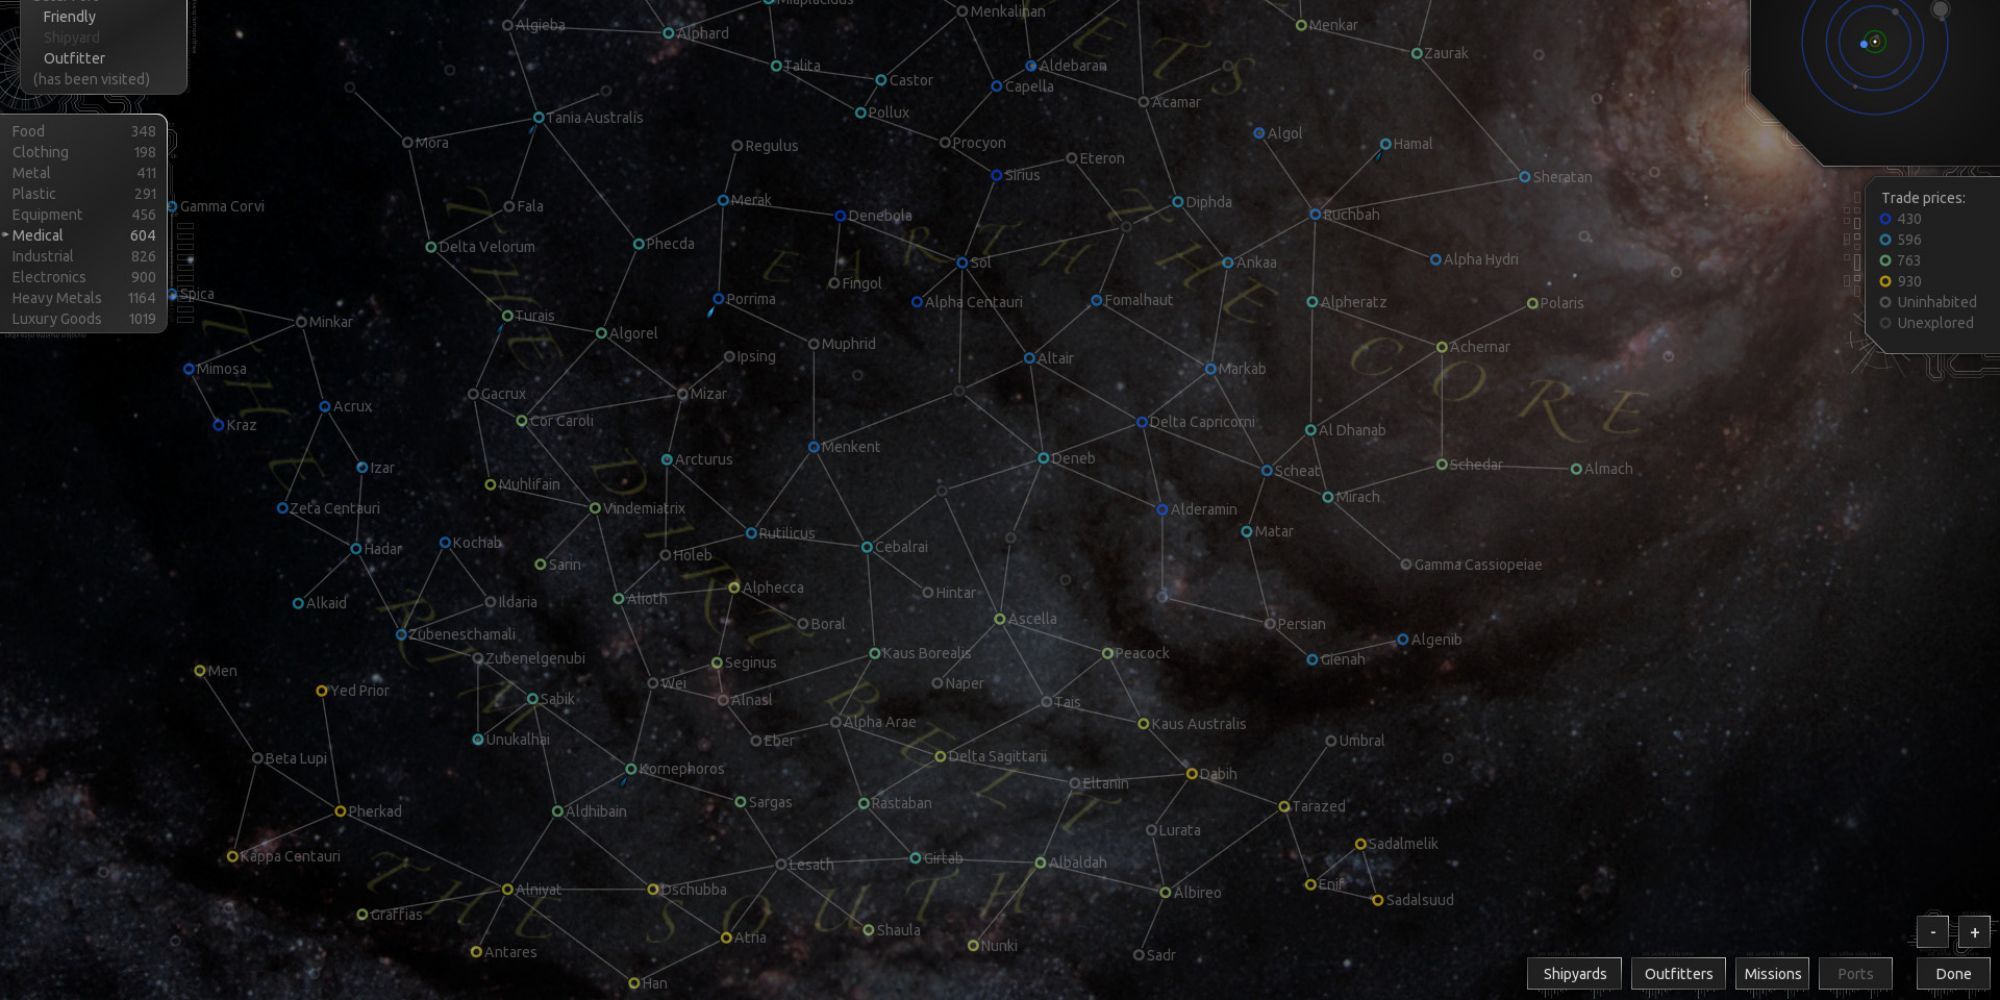 Star map showing routes between systems in Endless Sky